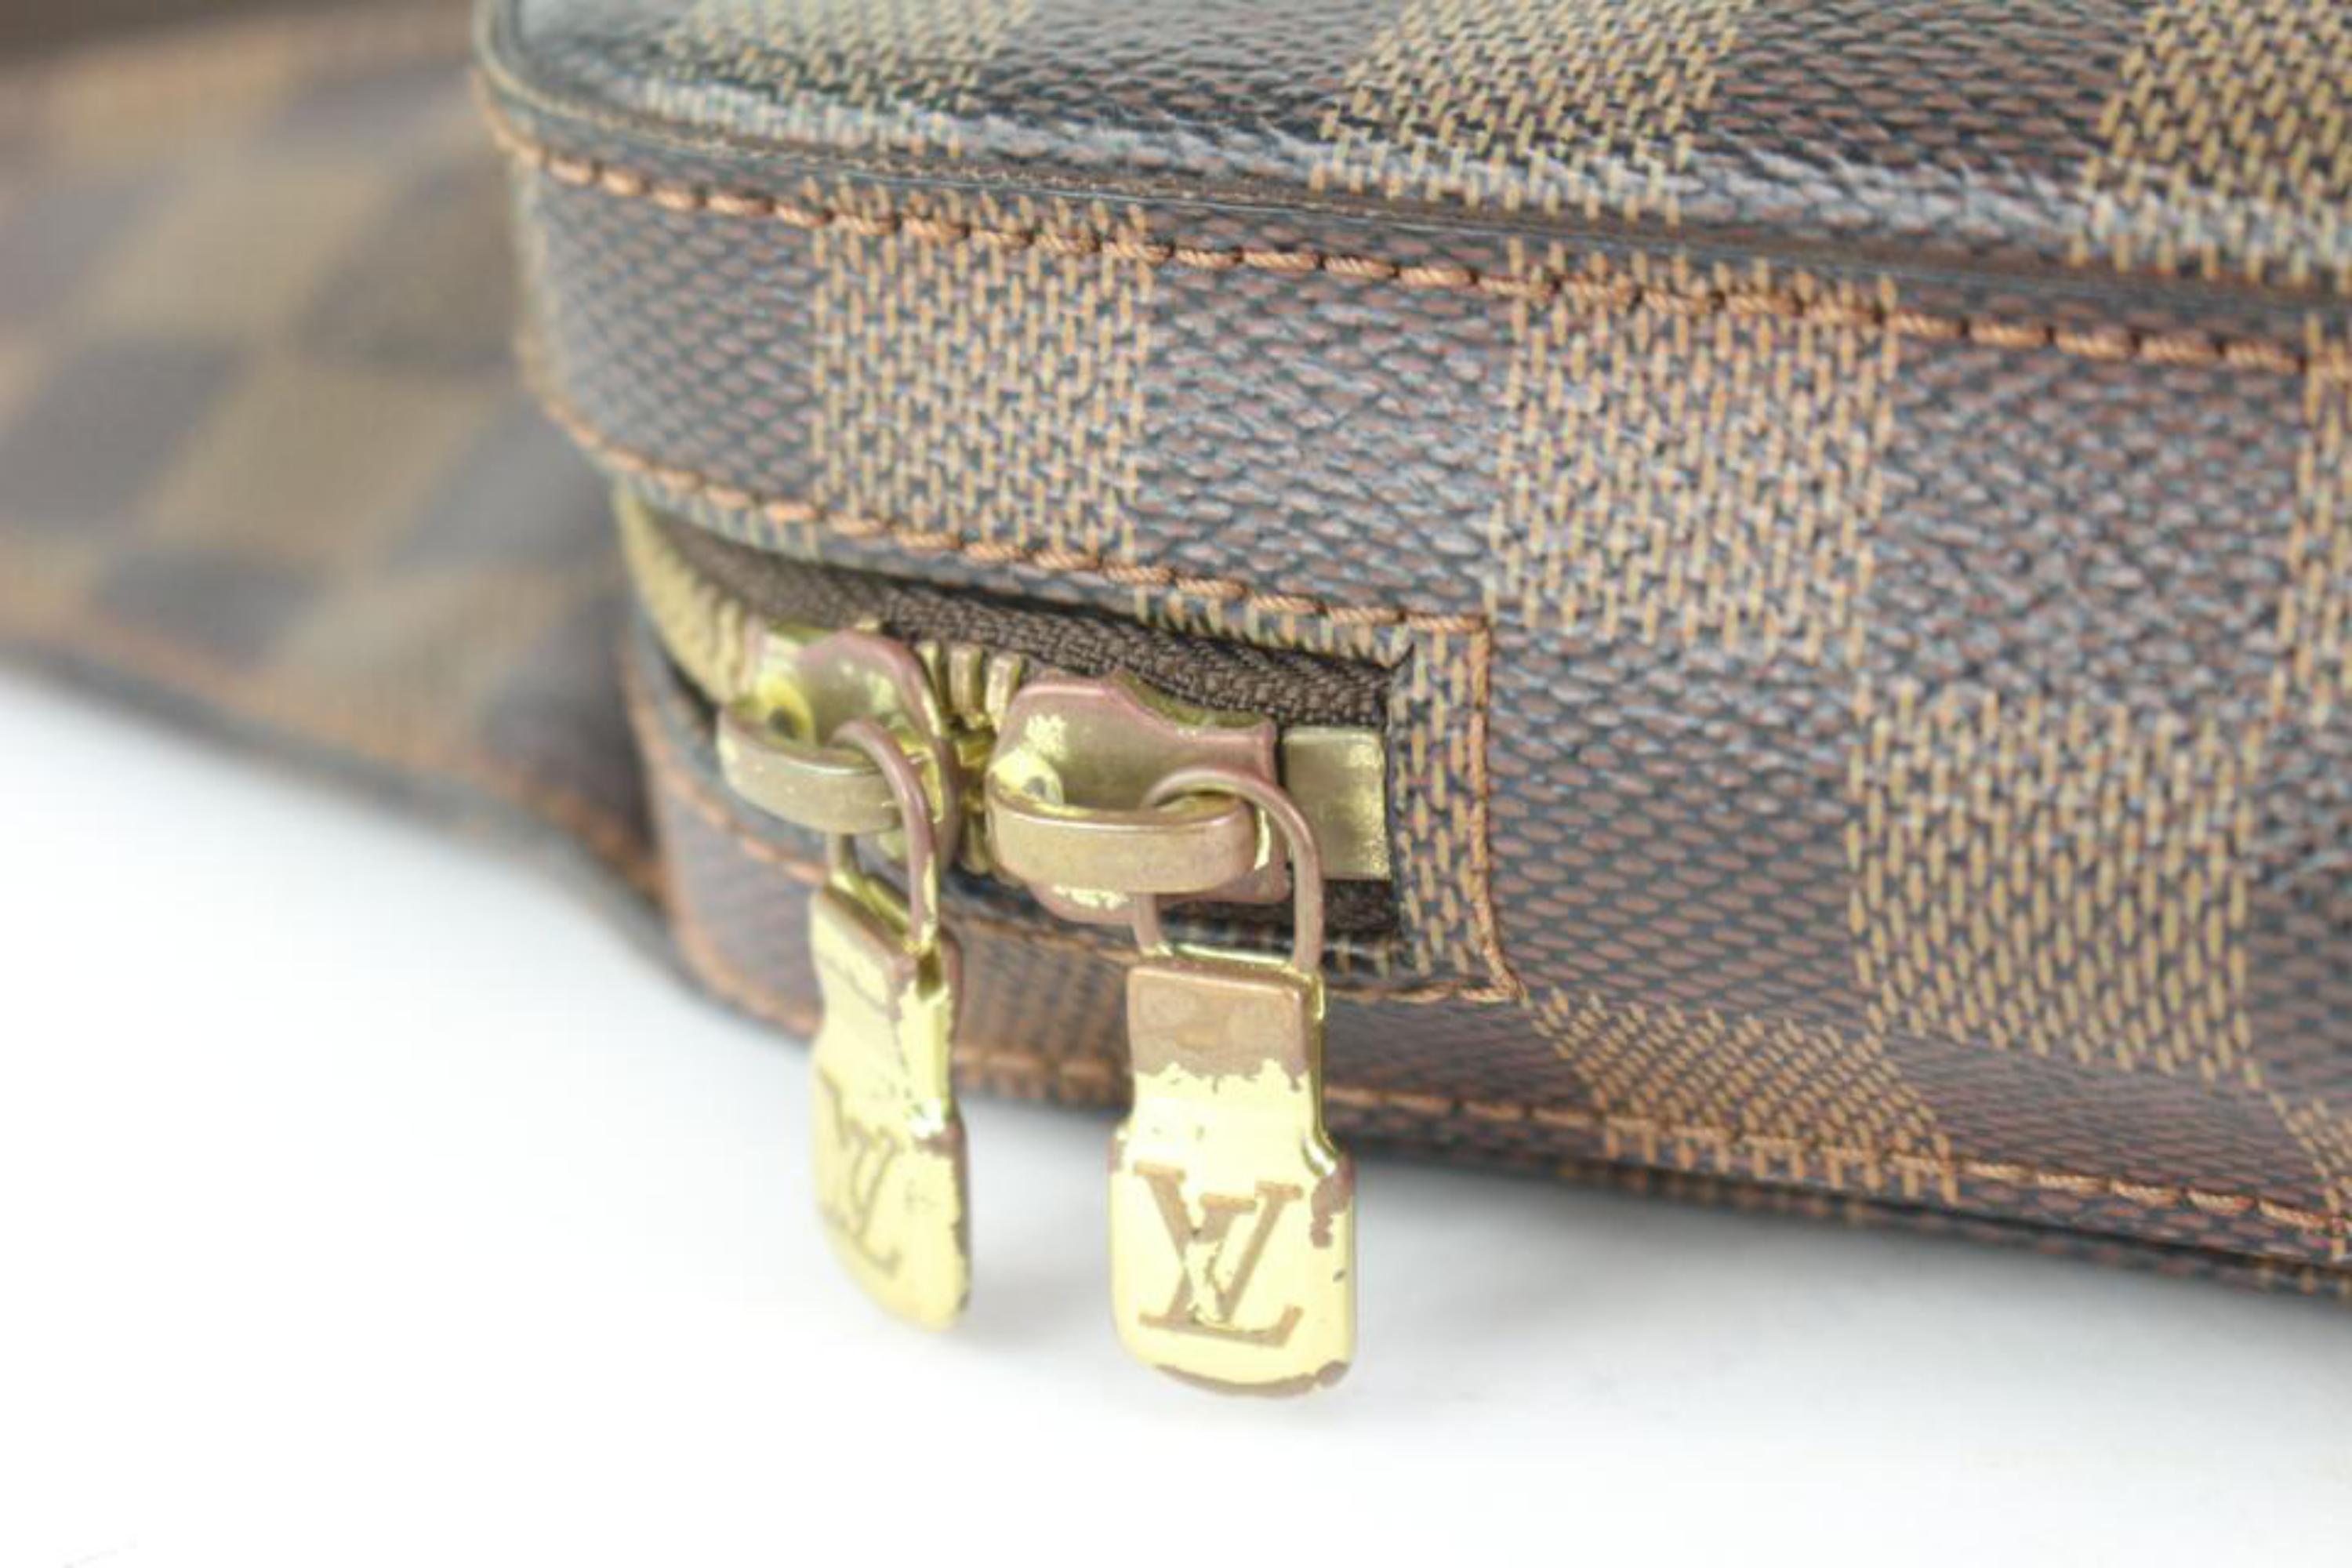 Louis Vuitton Damier Ebene Geronimos Bumbag Fanny Pack Waist Pouch 106lv24 In Fair Condition For Sale In Dix hills, NY